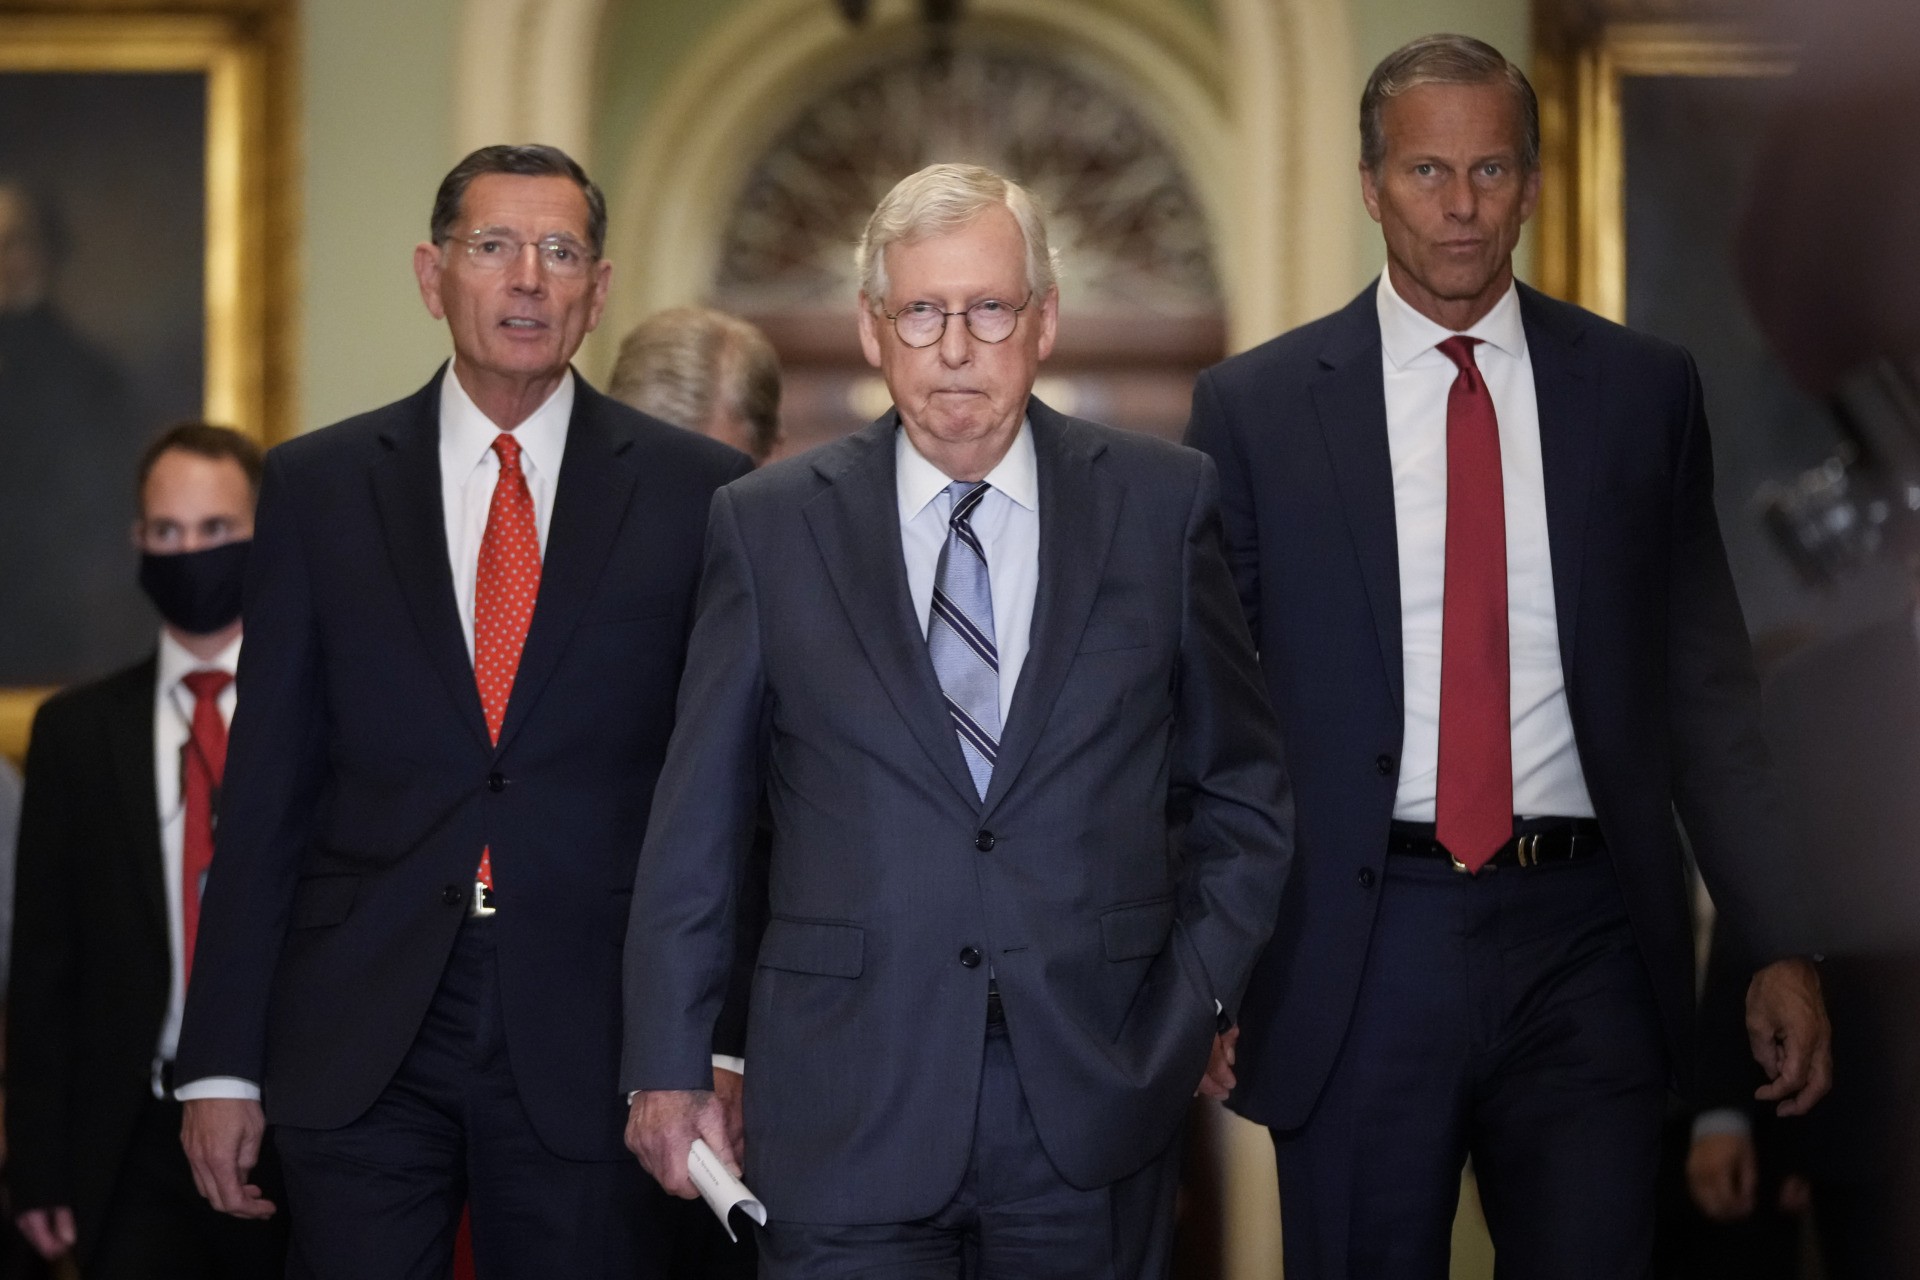 WASHINGTON, DC - SEPTEMBER 28: (L-R) Sen. John Barrasso (R-WY), Senate Minority Leader Mitch McConnell (R-KY) and Sen. John Thune (R-SD) arrive to speak with reporters after a lunch meeting with Senate Republicans at the U.S. Capitol on September 28, 2021 in Washington, DC. Senator McConnell said on Tuesday that his Republican caucus will not assist Democrats in raising the debt ceiling. (Photo by Drew Angerer/Getty Images)